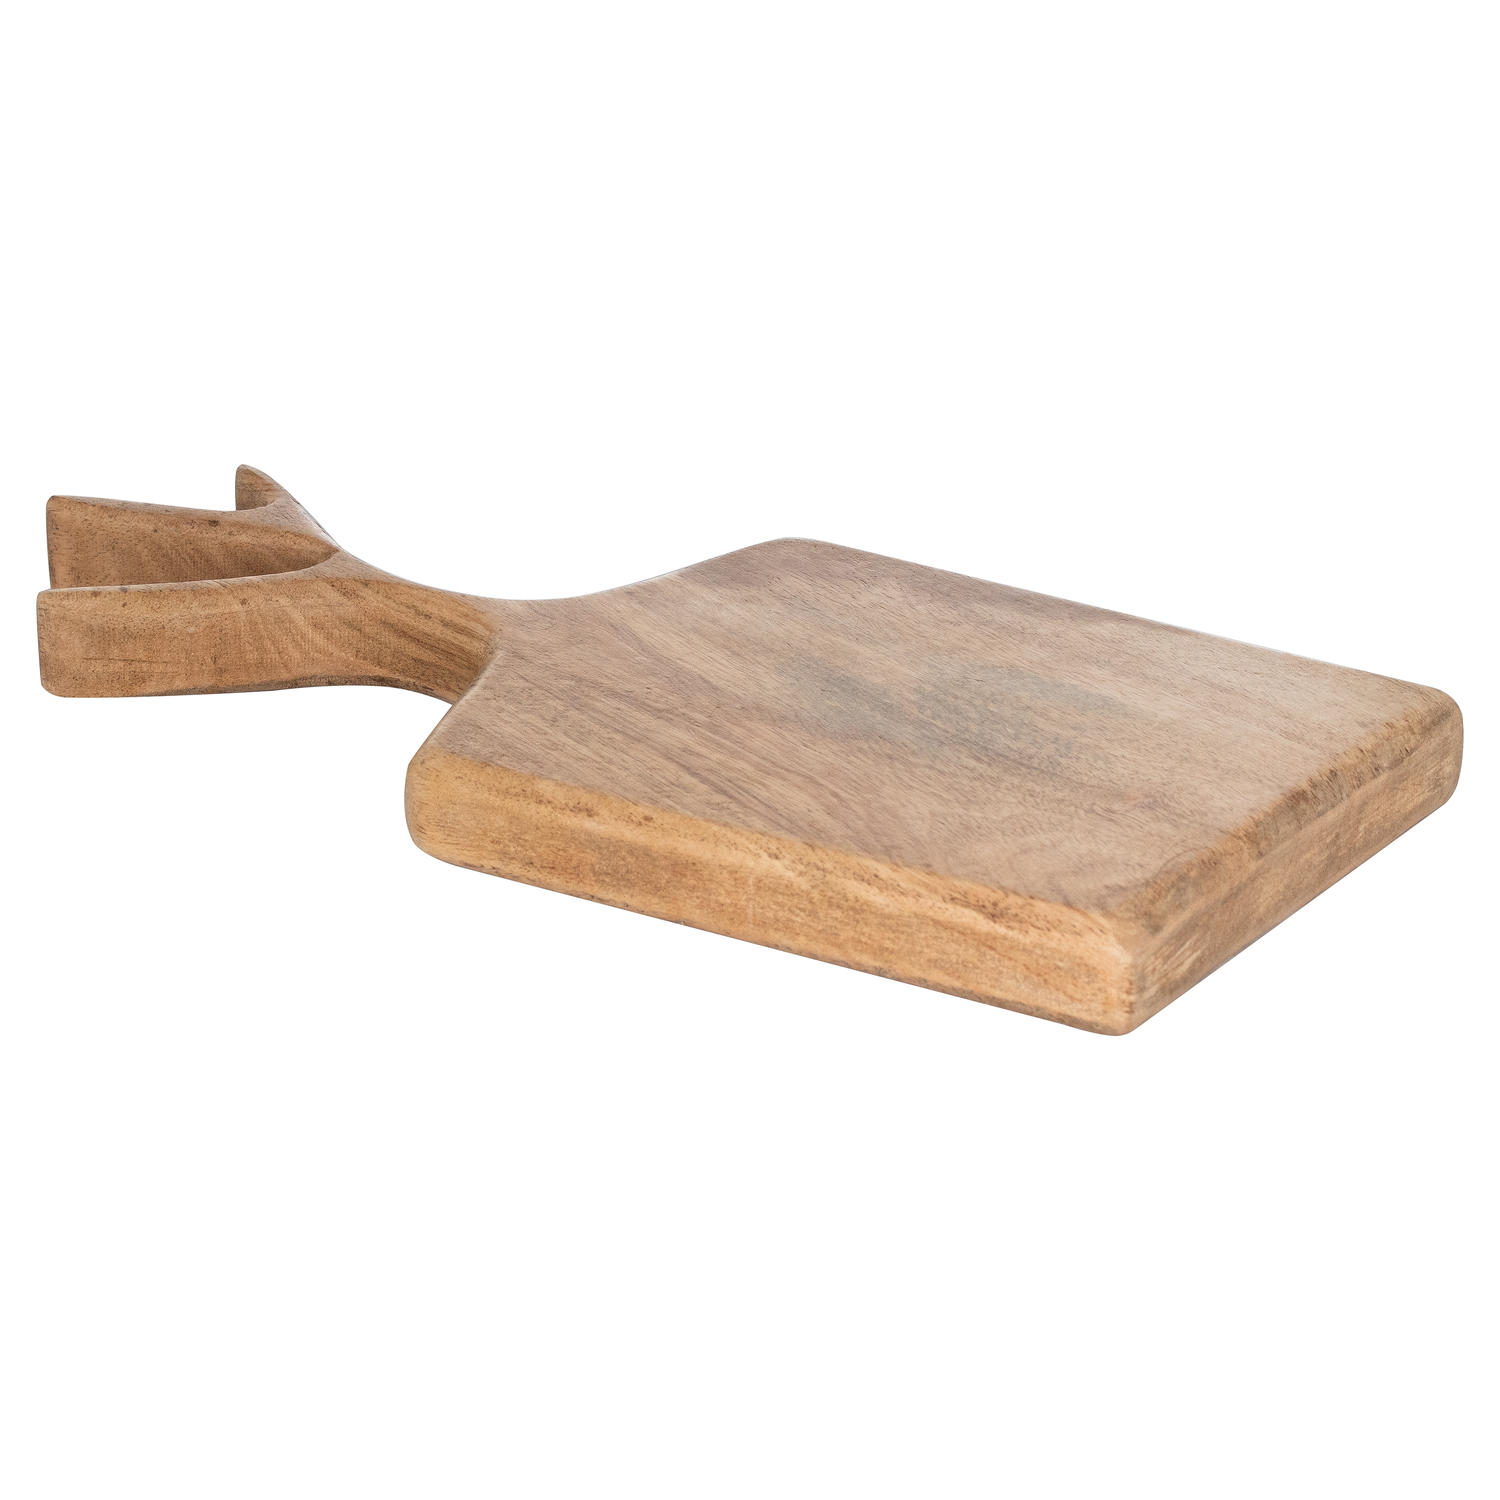 Stag Chopping Board - Image 2